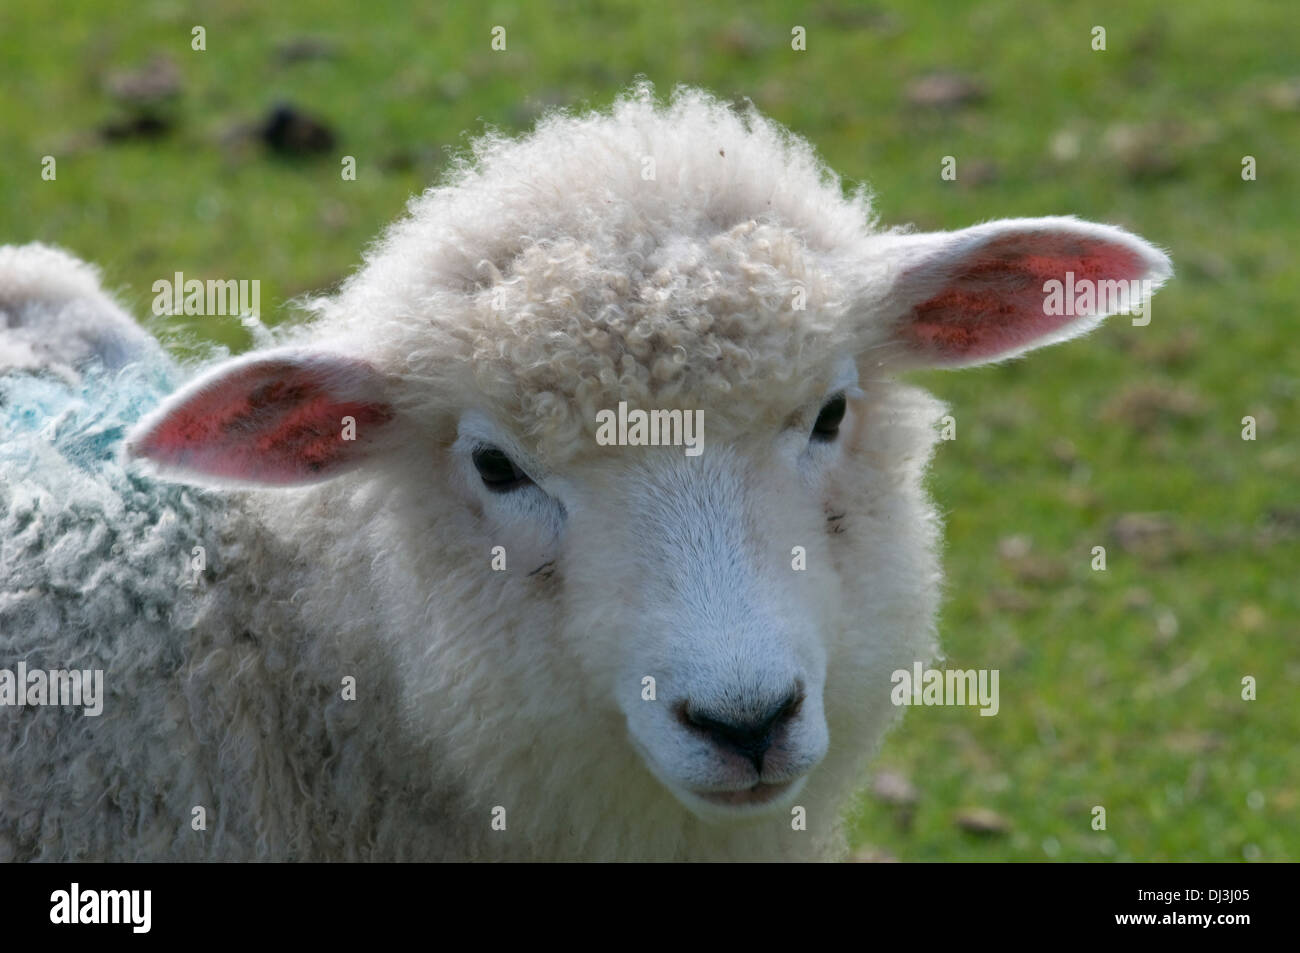 Young sheep Stock Photo